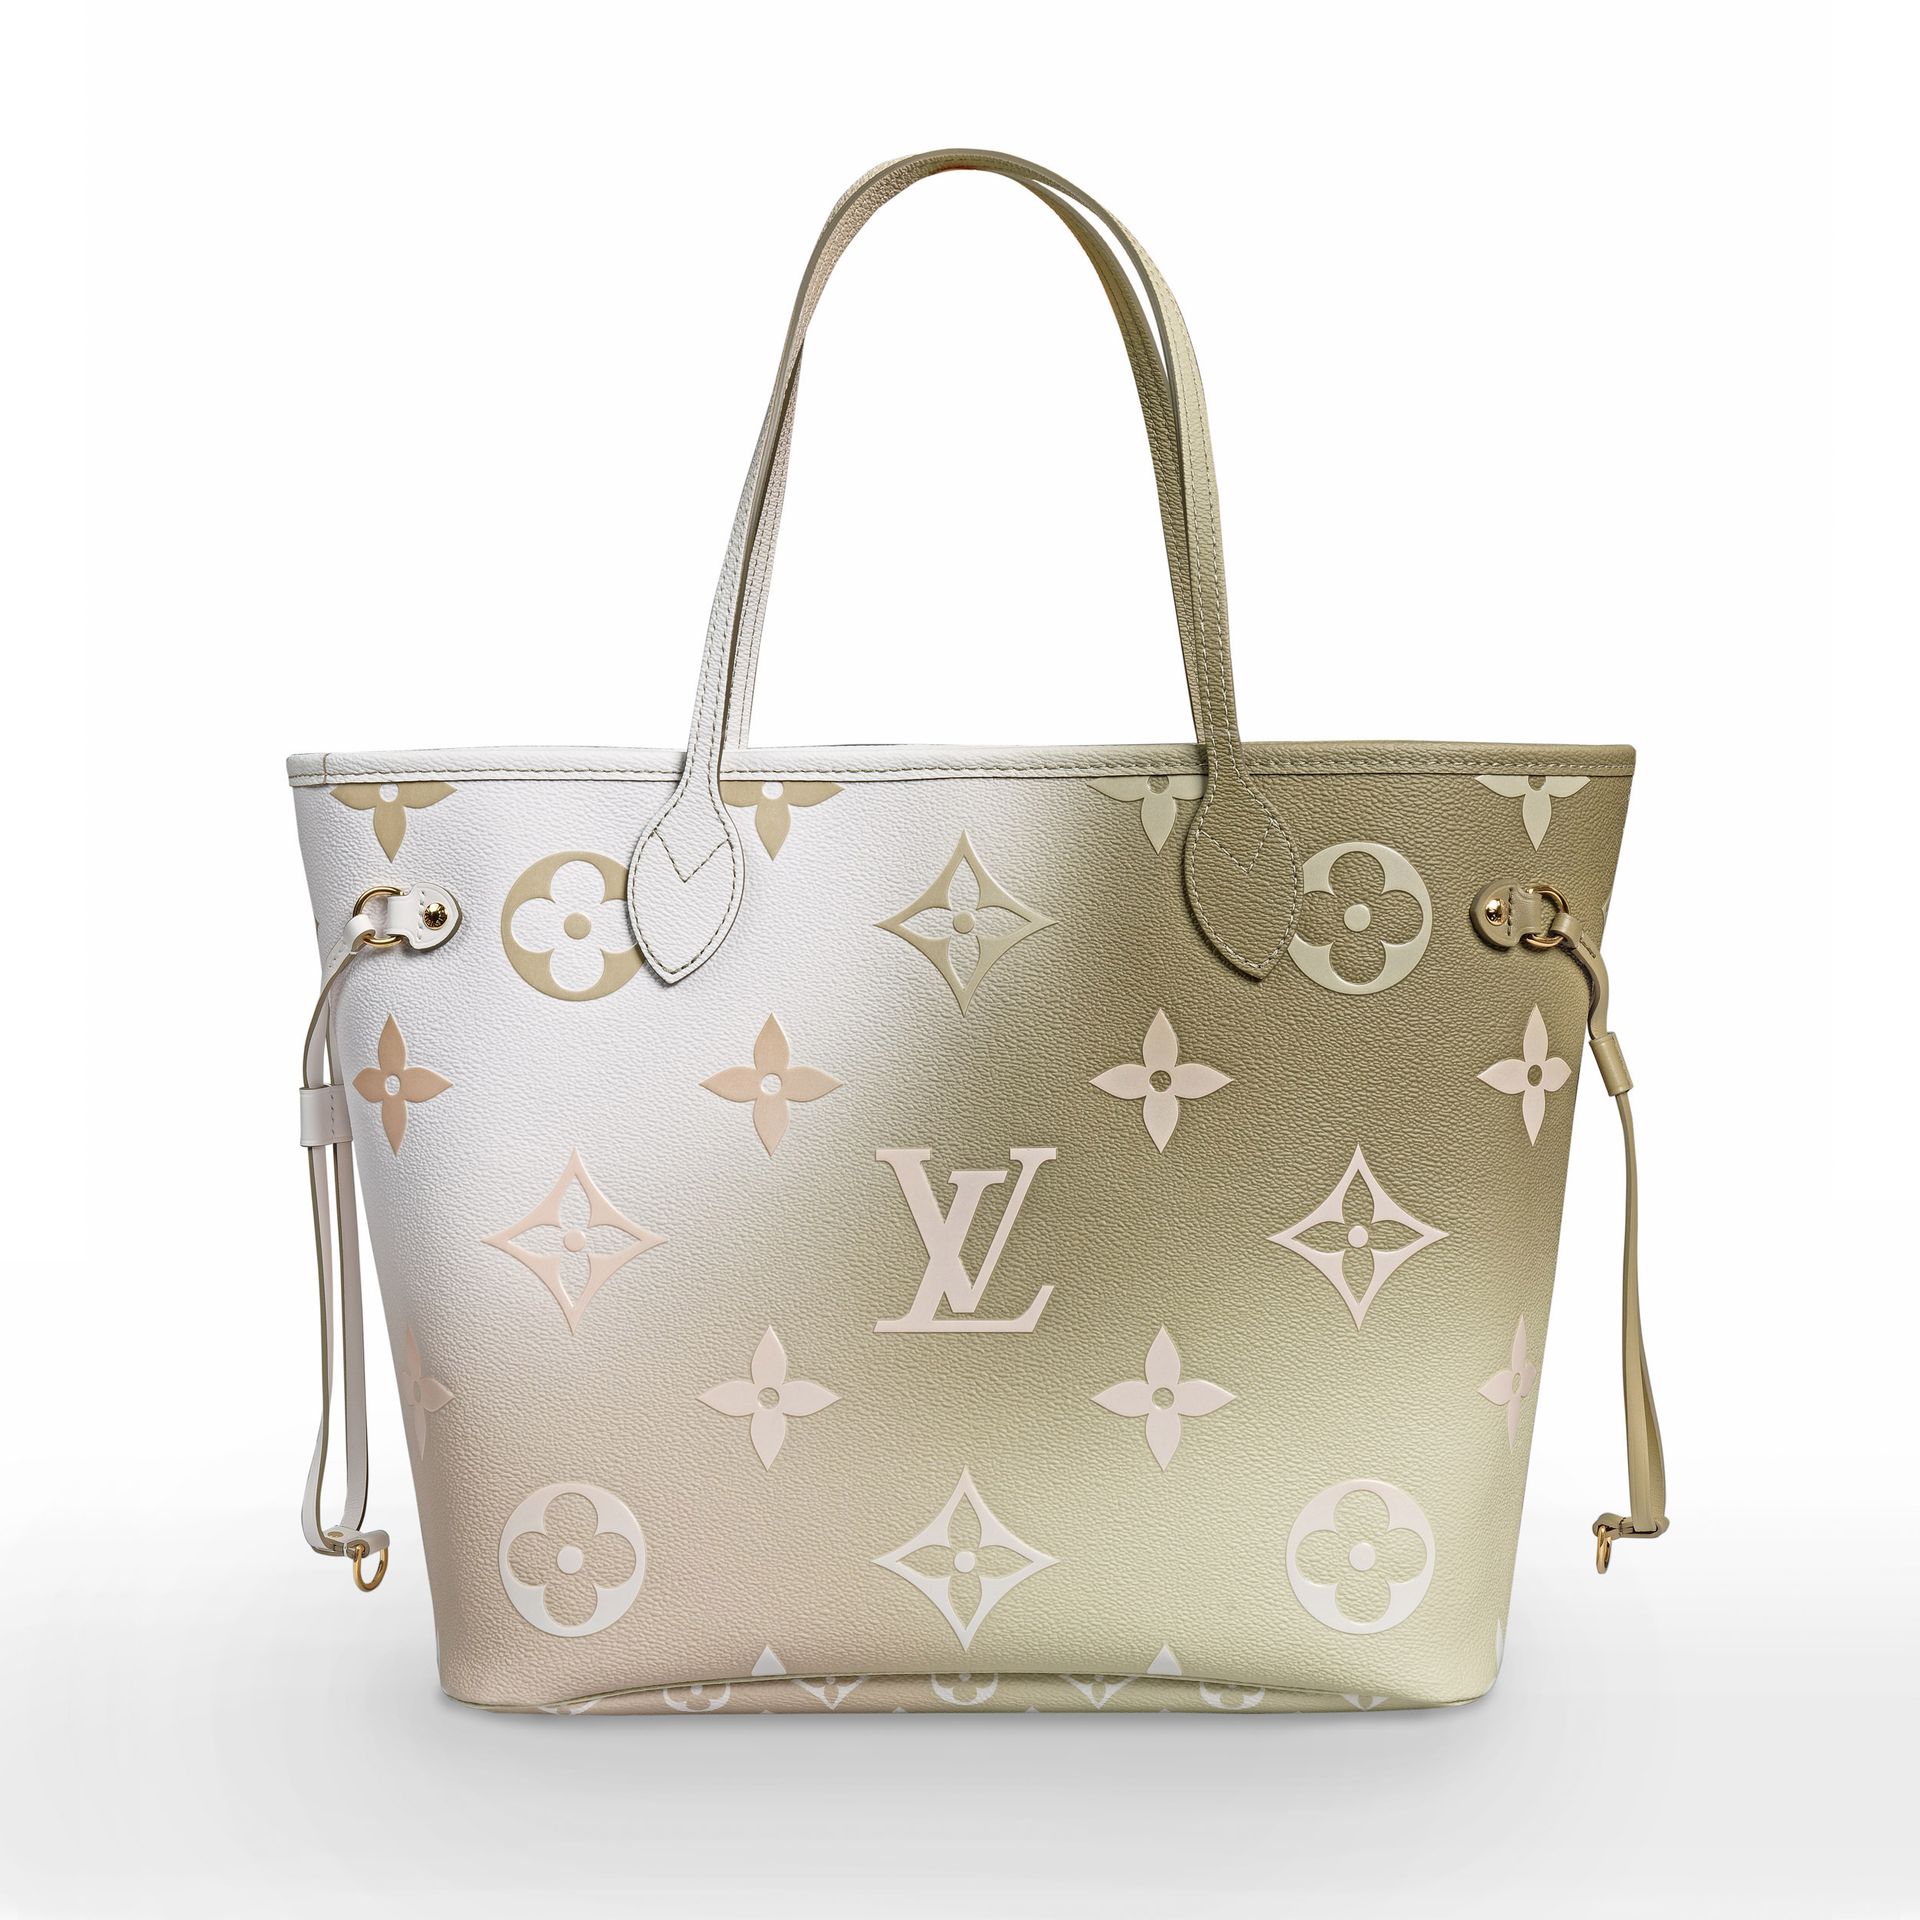 LOUIS VUITTON Neverfull bag in monogram coated canvas an…